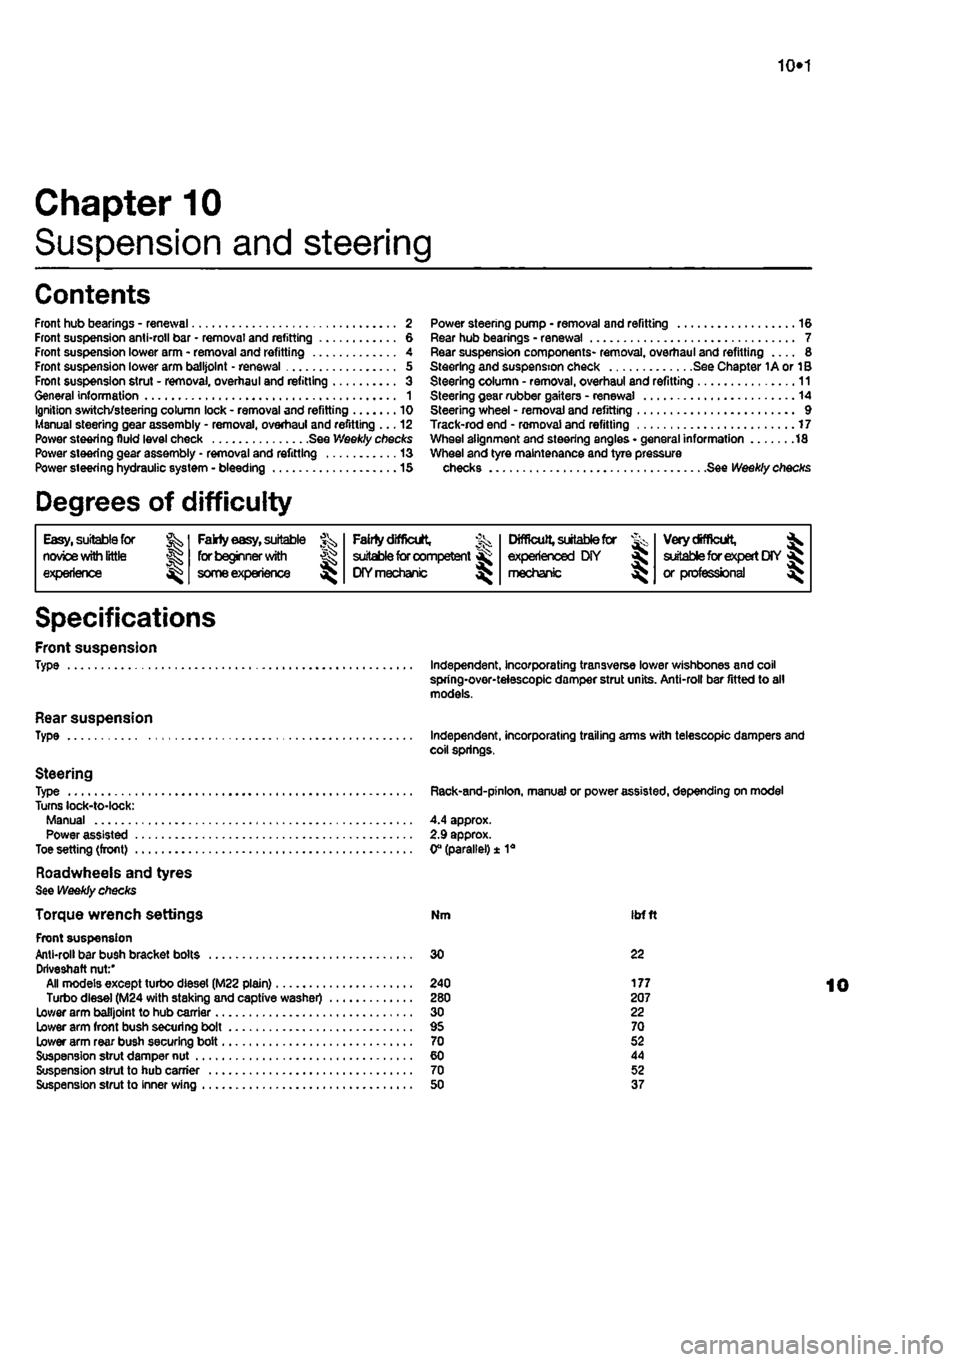 FIAT PUNTO 1994 176 / 1.G Workshop Manual 
10*1 
Chapter 10 
Suspension and steering 
Contents 
Front hub bearings - renewal 2 Front suspension anti-roll bar • removal and refitting 6 Front suspension lower arm - removal and refitting 4 Fro